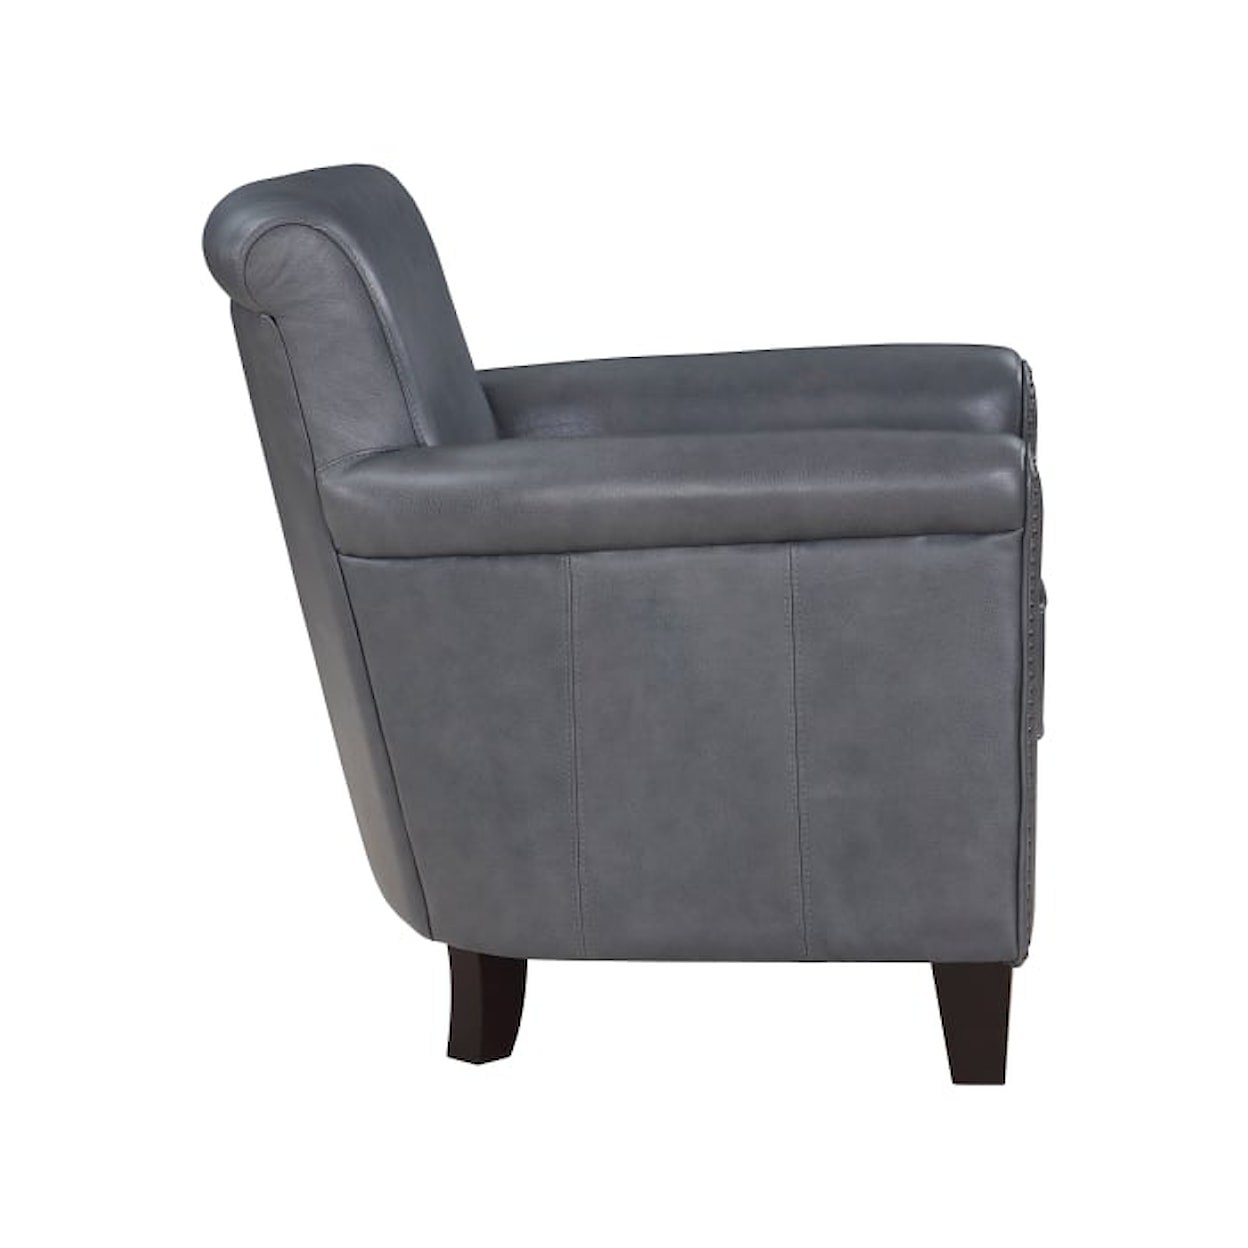 Homelegance Furniture Braintree Accent Chair